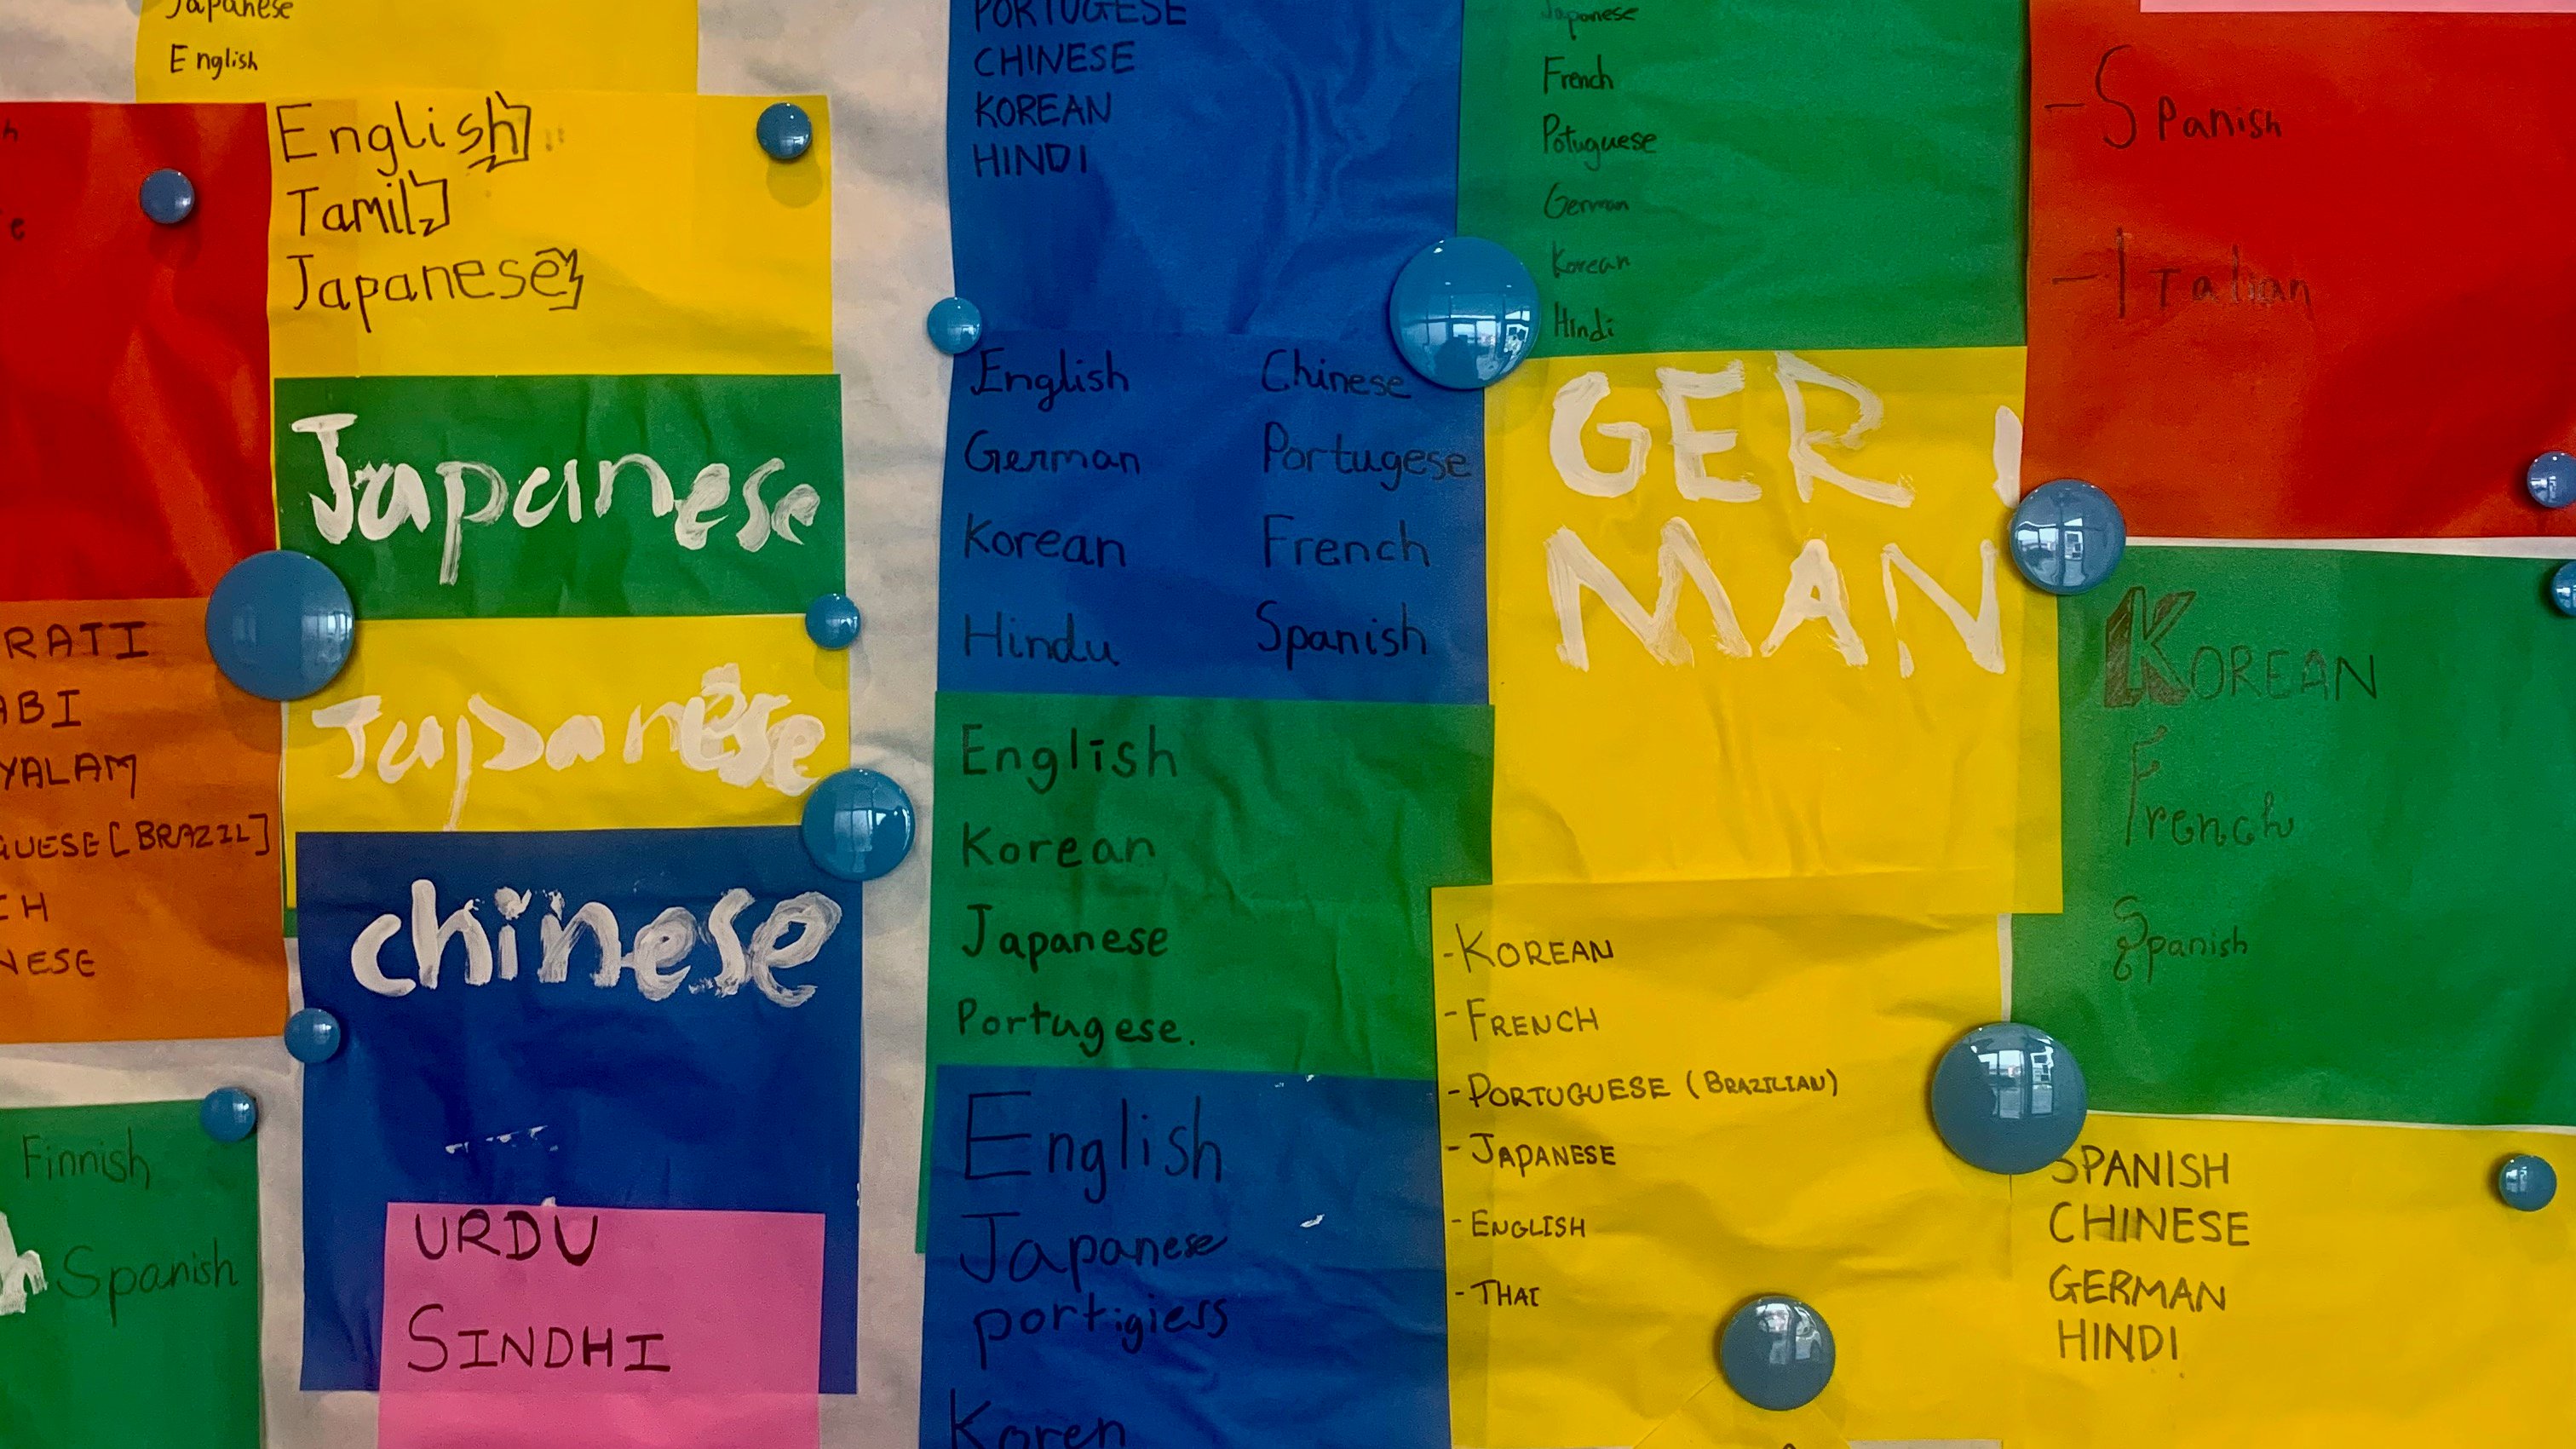 Colorful poster of student's lists of languages they speak